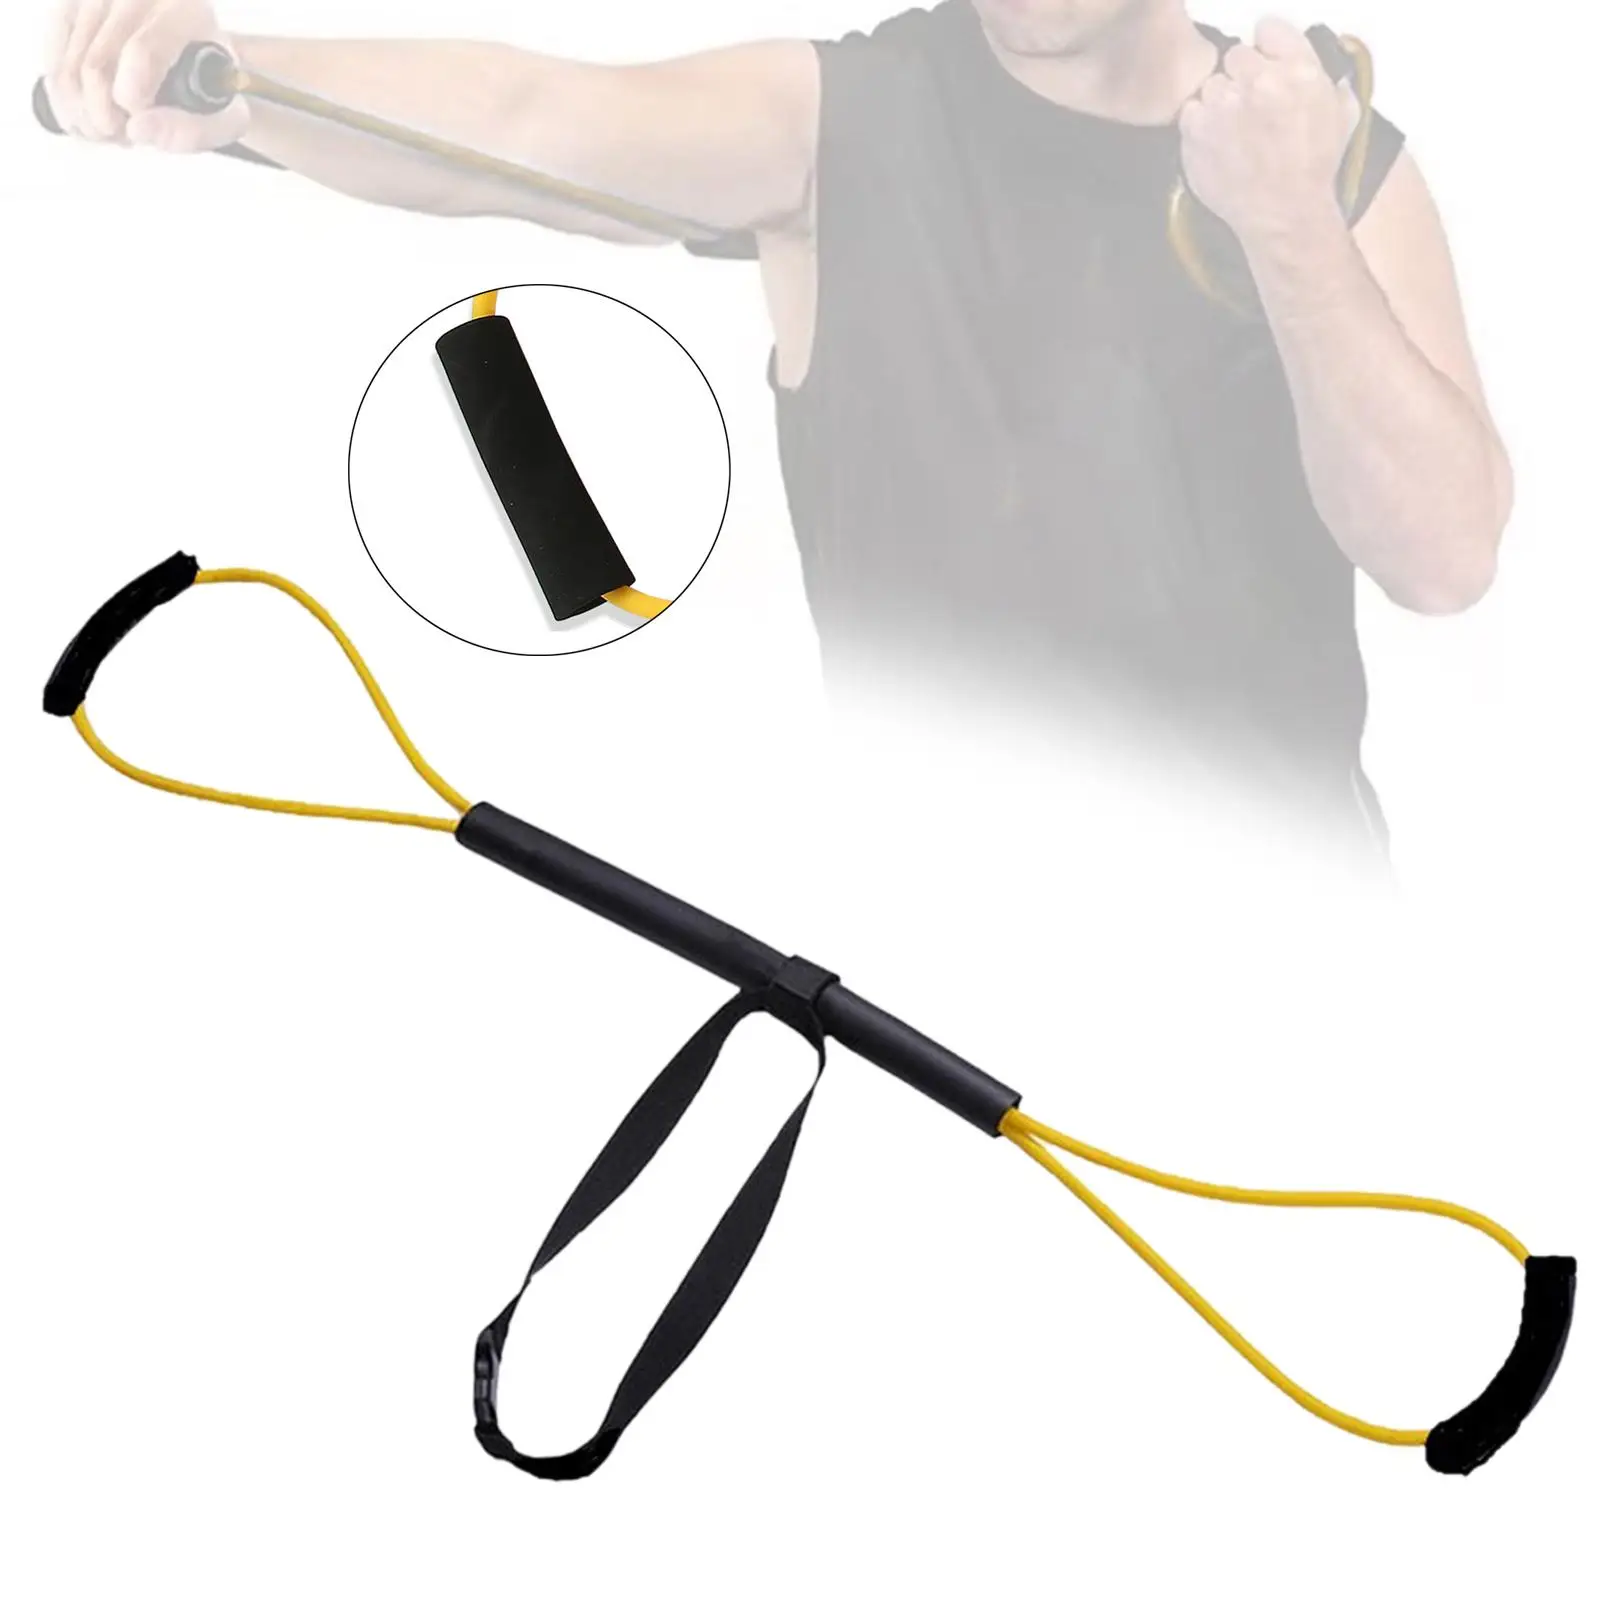 Boxing Resistance Bands Exercise Bands Elastic Bands Accessories for Shadow Boxing for Home Gym